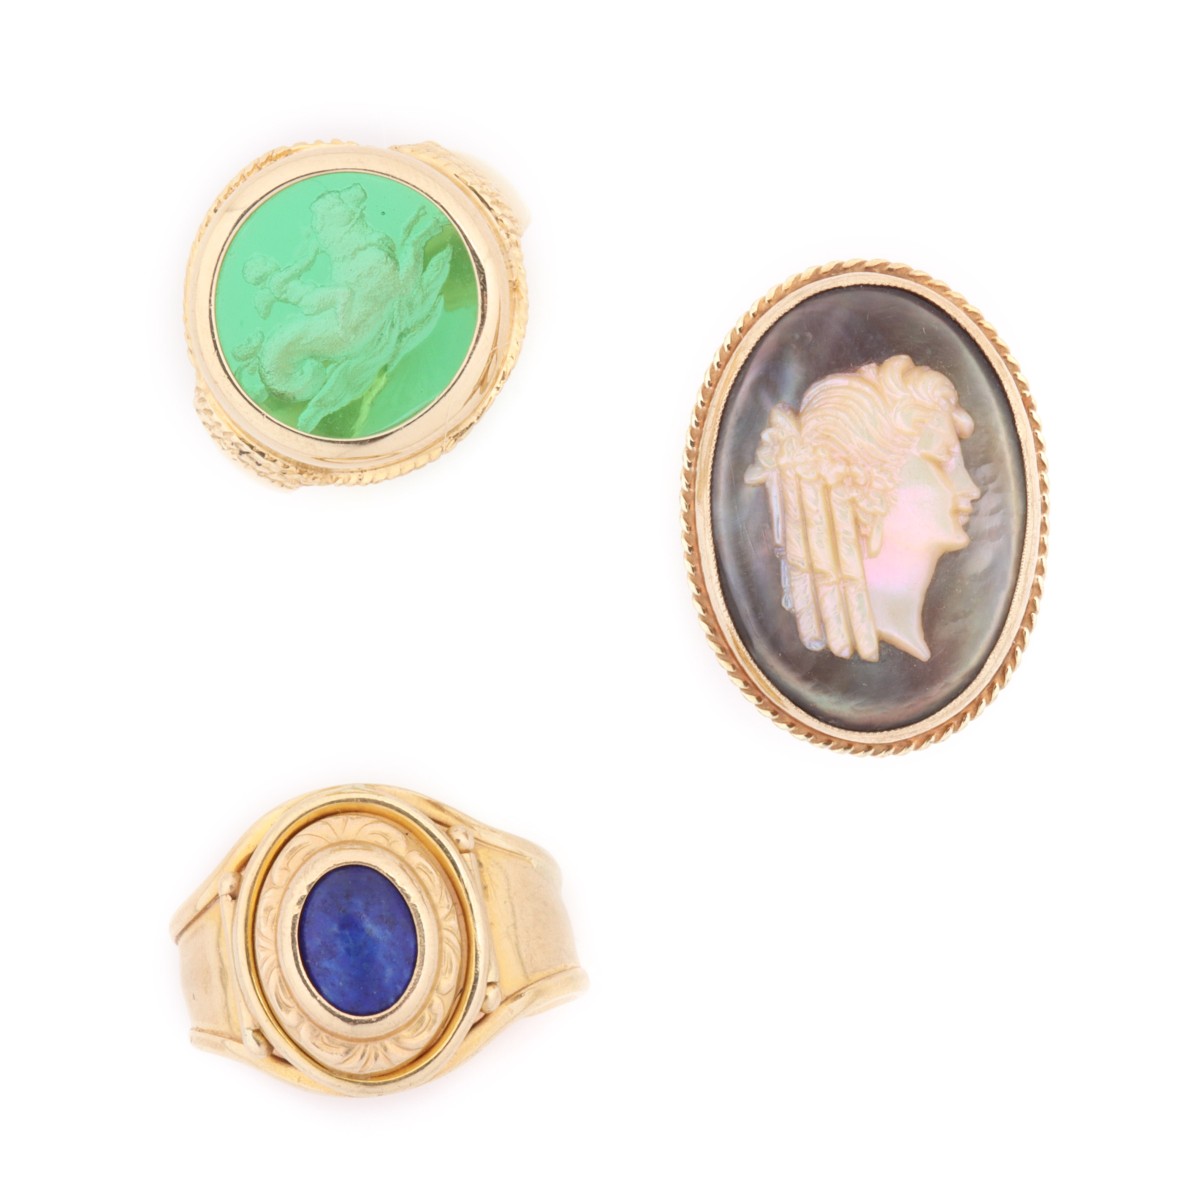 A COLLECTION OF 14K GOLD RINGS WITH SEMI-PRECIOUS